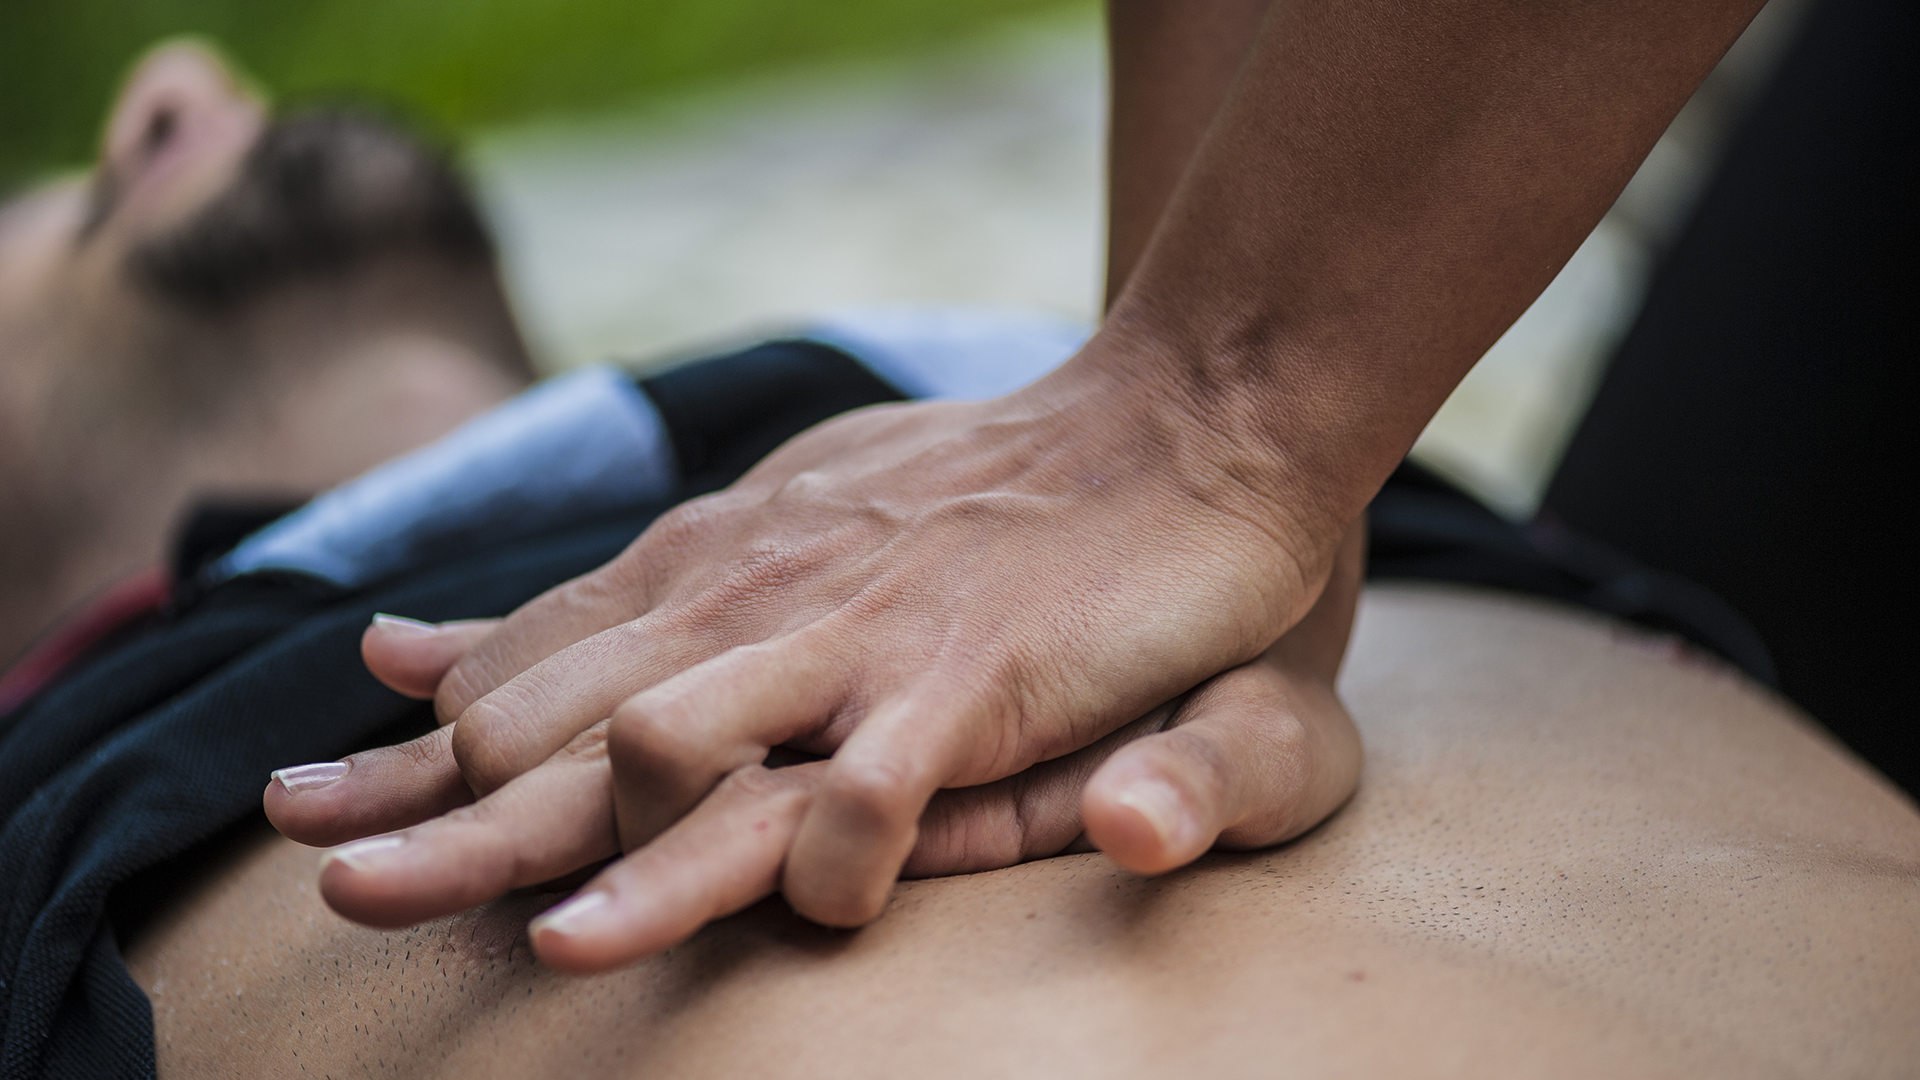 The first responder is the one who decides to act by doing cardiopulmonary resuscitation (CPR), keeping the blood circulating until the ambulance arrives (Getty Images)